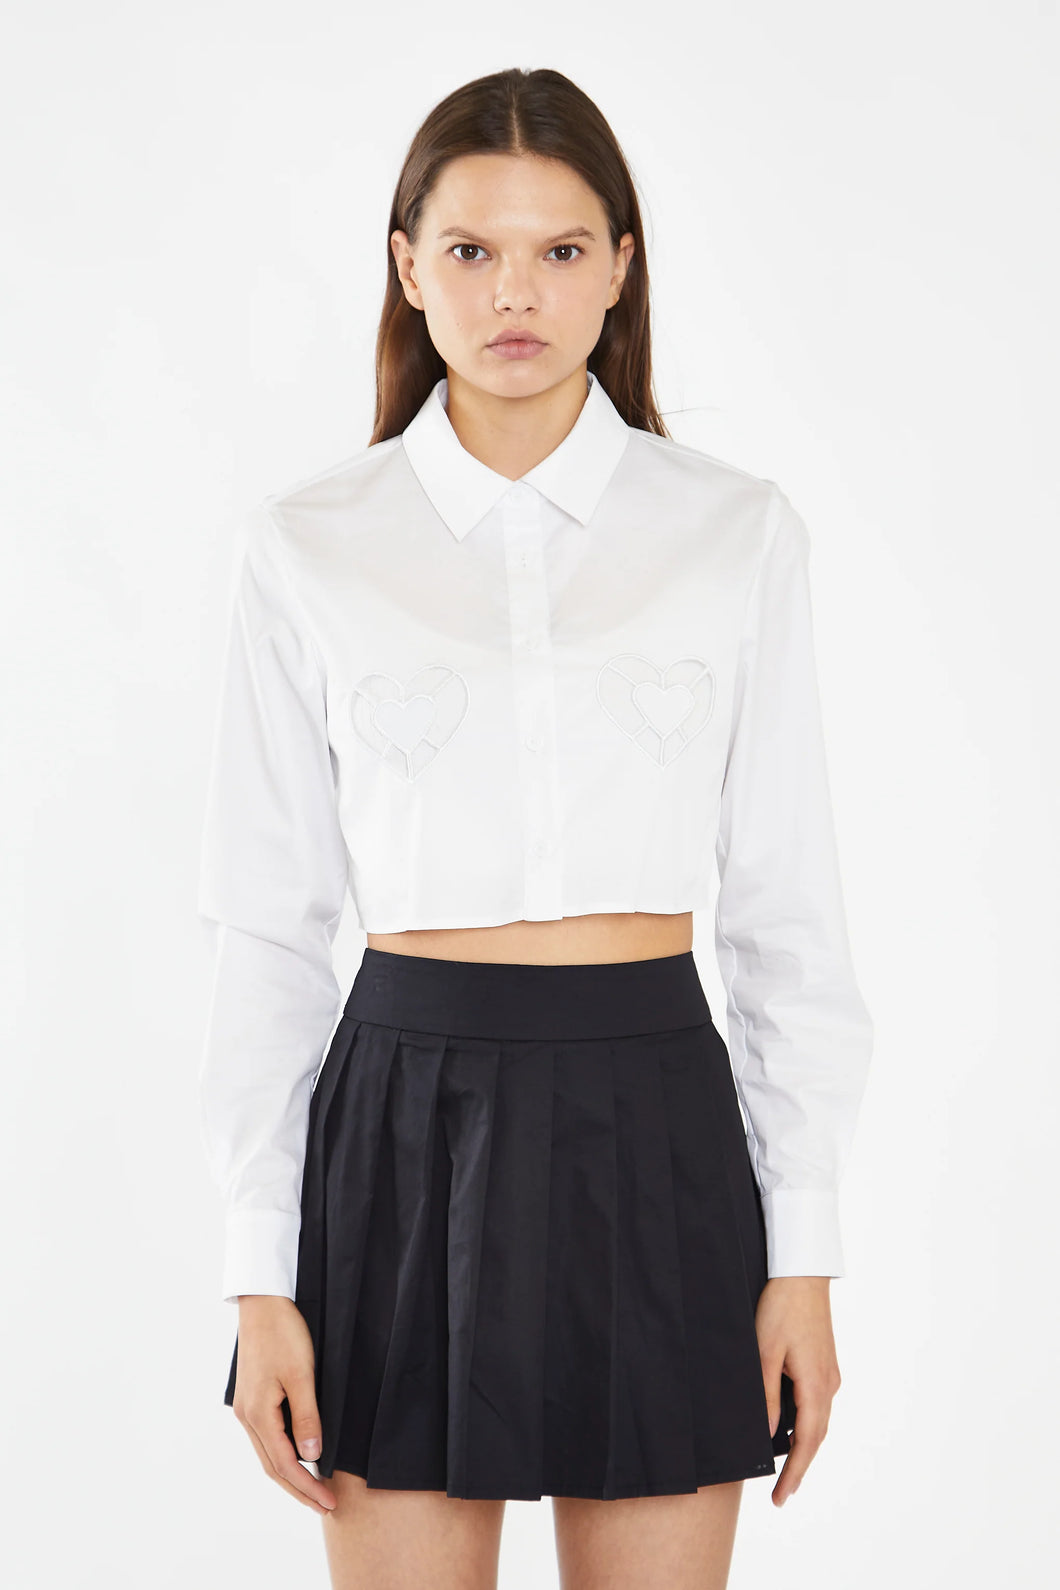 Introducing our Glamorous Women's White Heart Cut-Out Crop Button Down Shirt, the perfect choice to make a bold and stylish statement at any event! This ultra-cute, cropped button-down is designed to elevate your fashion game and make you the heart of the party. Crafted with attention to detail, the shirt features a chic heart-shaped cut-out that adds a playful and romantic touch to your look.